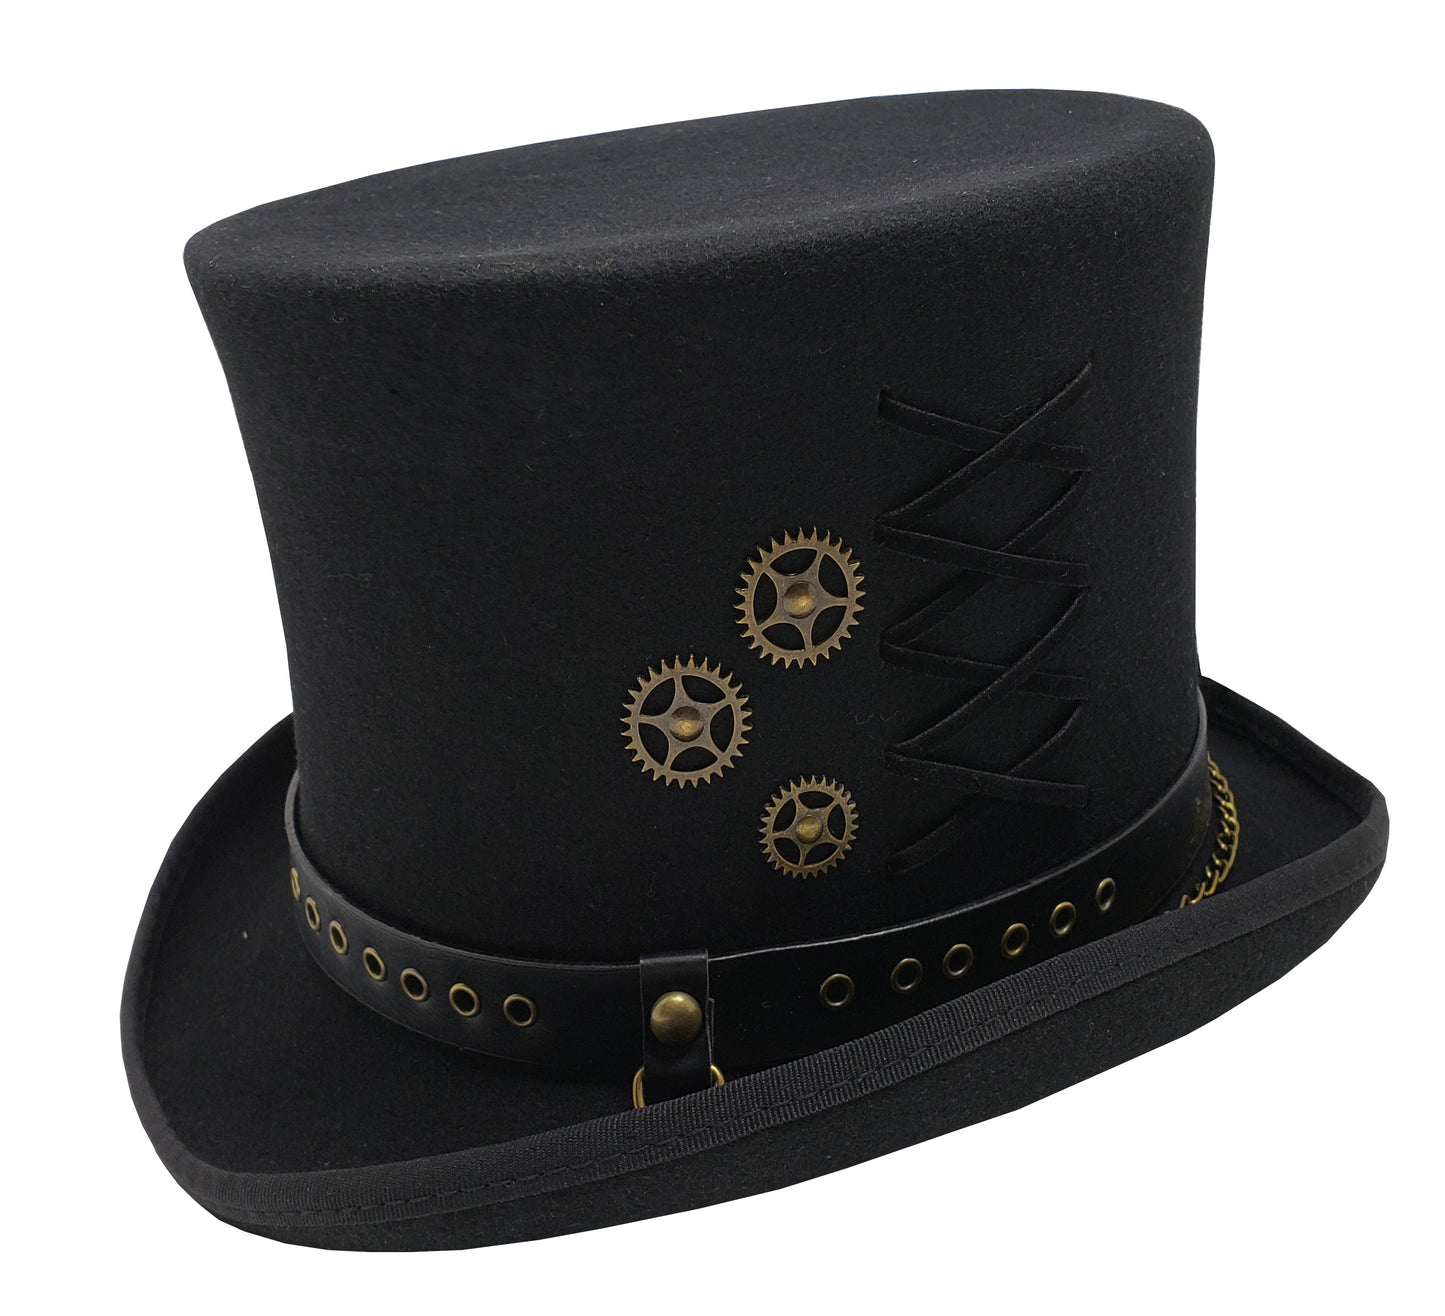 Different Touch 100% Wool Felt Victorian Mad Hatter Steampunk 6" Tall Magic Top Hats